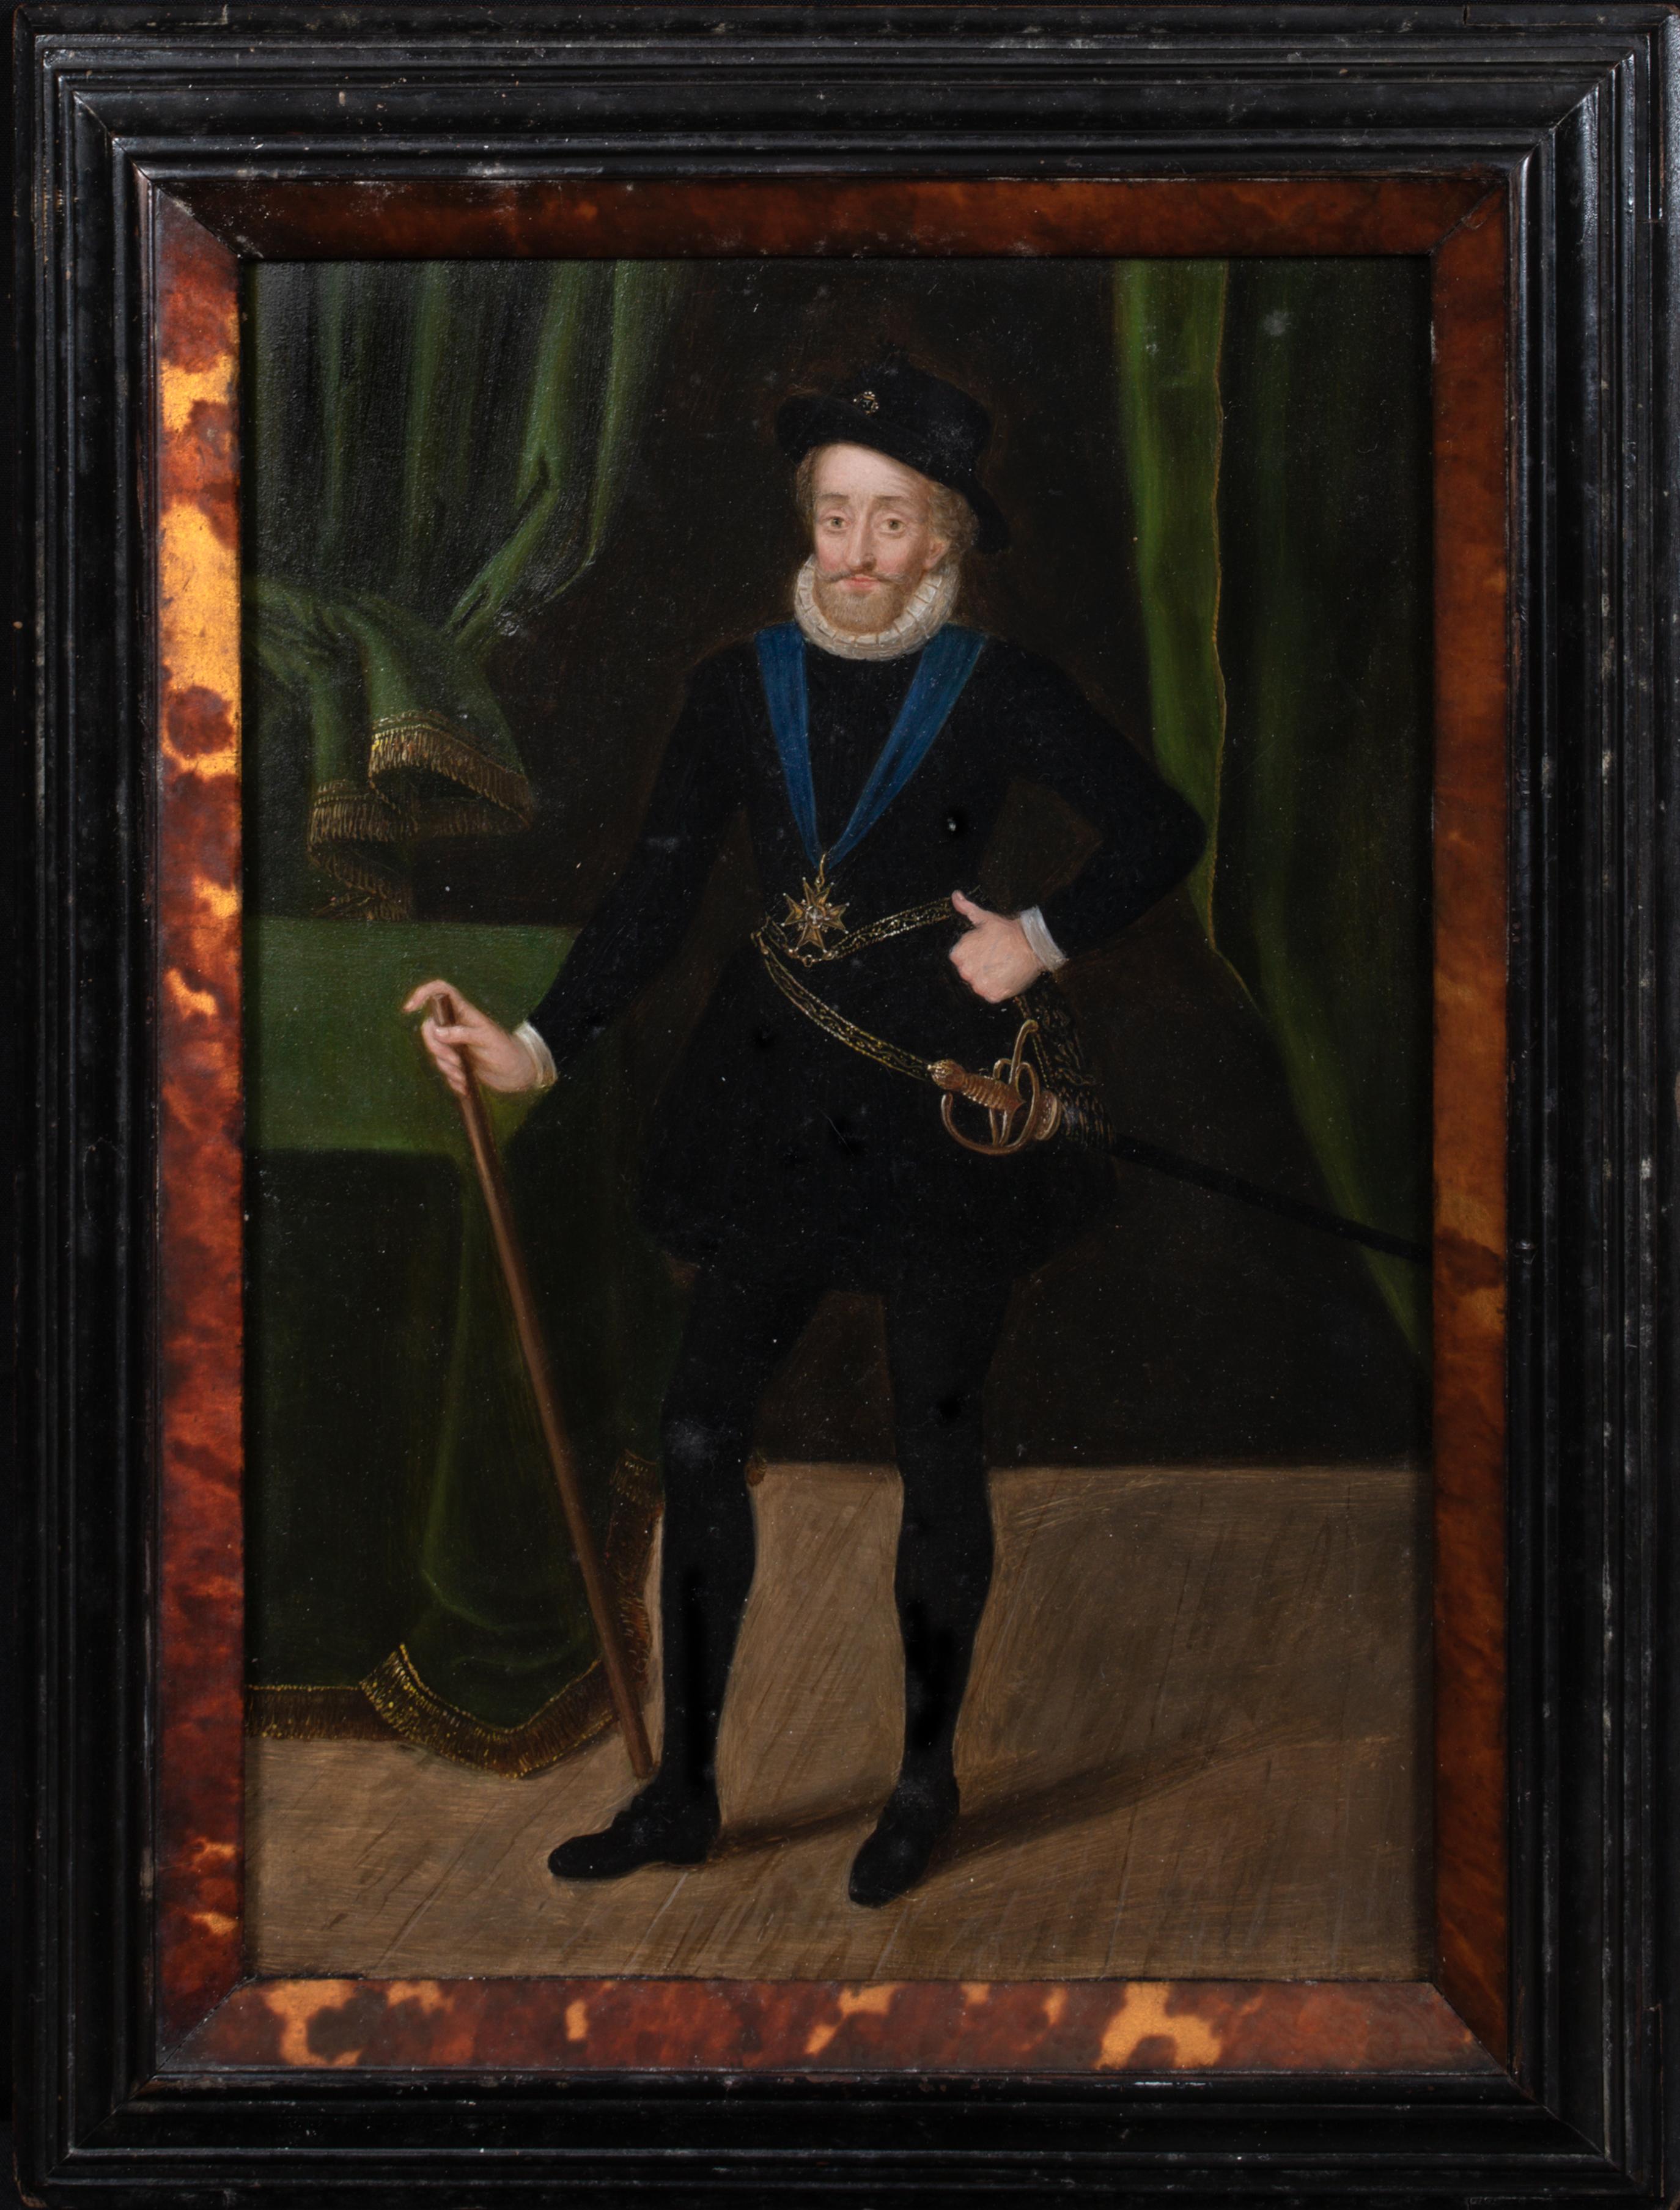 Portrait Henry IV King Of France, 16th Century  Studio of FRANS POURBUS  - Painting by Frans Pourbus the Younger